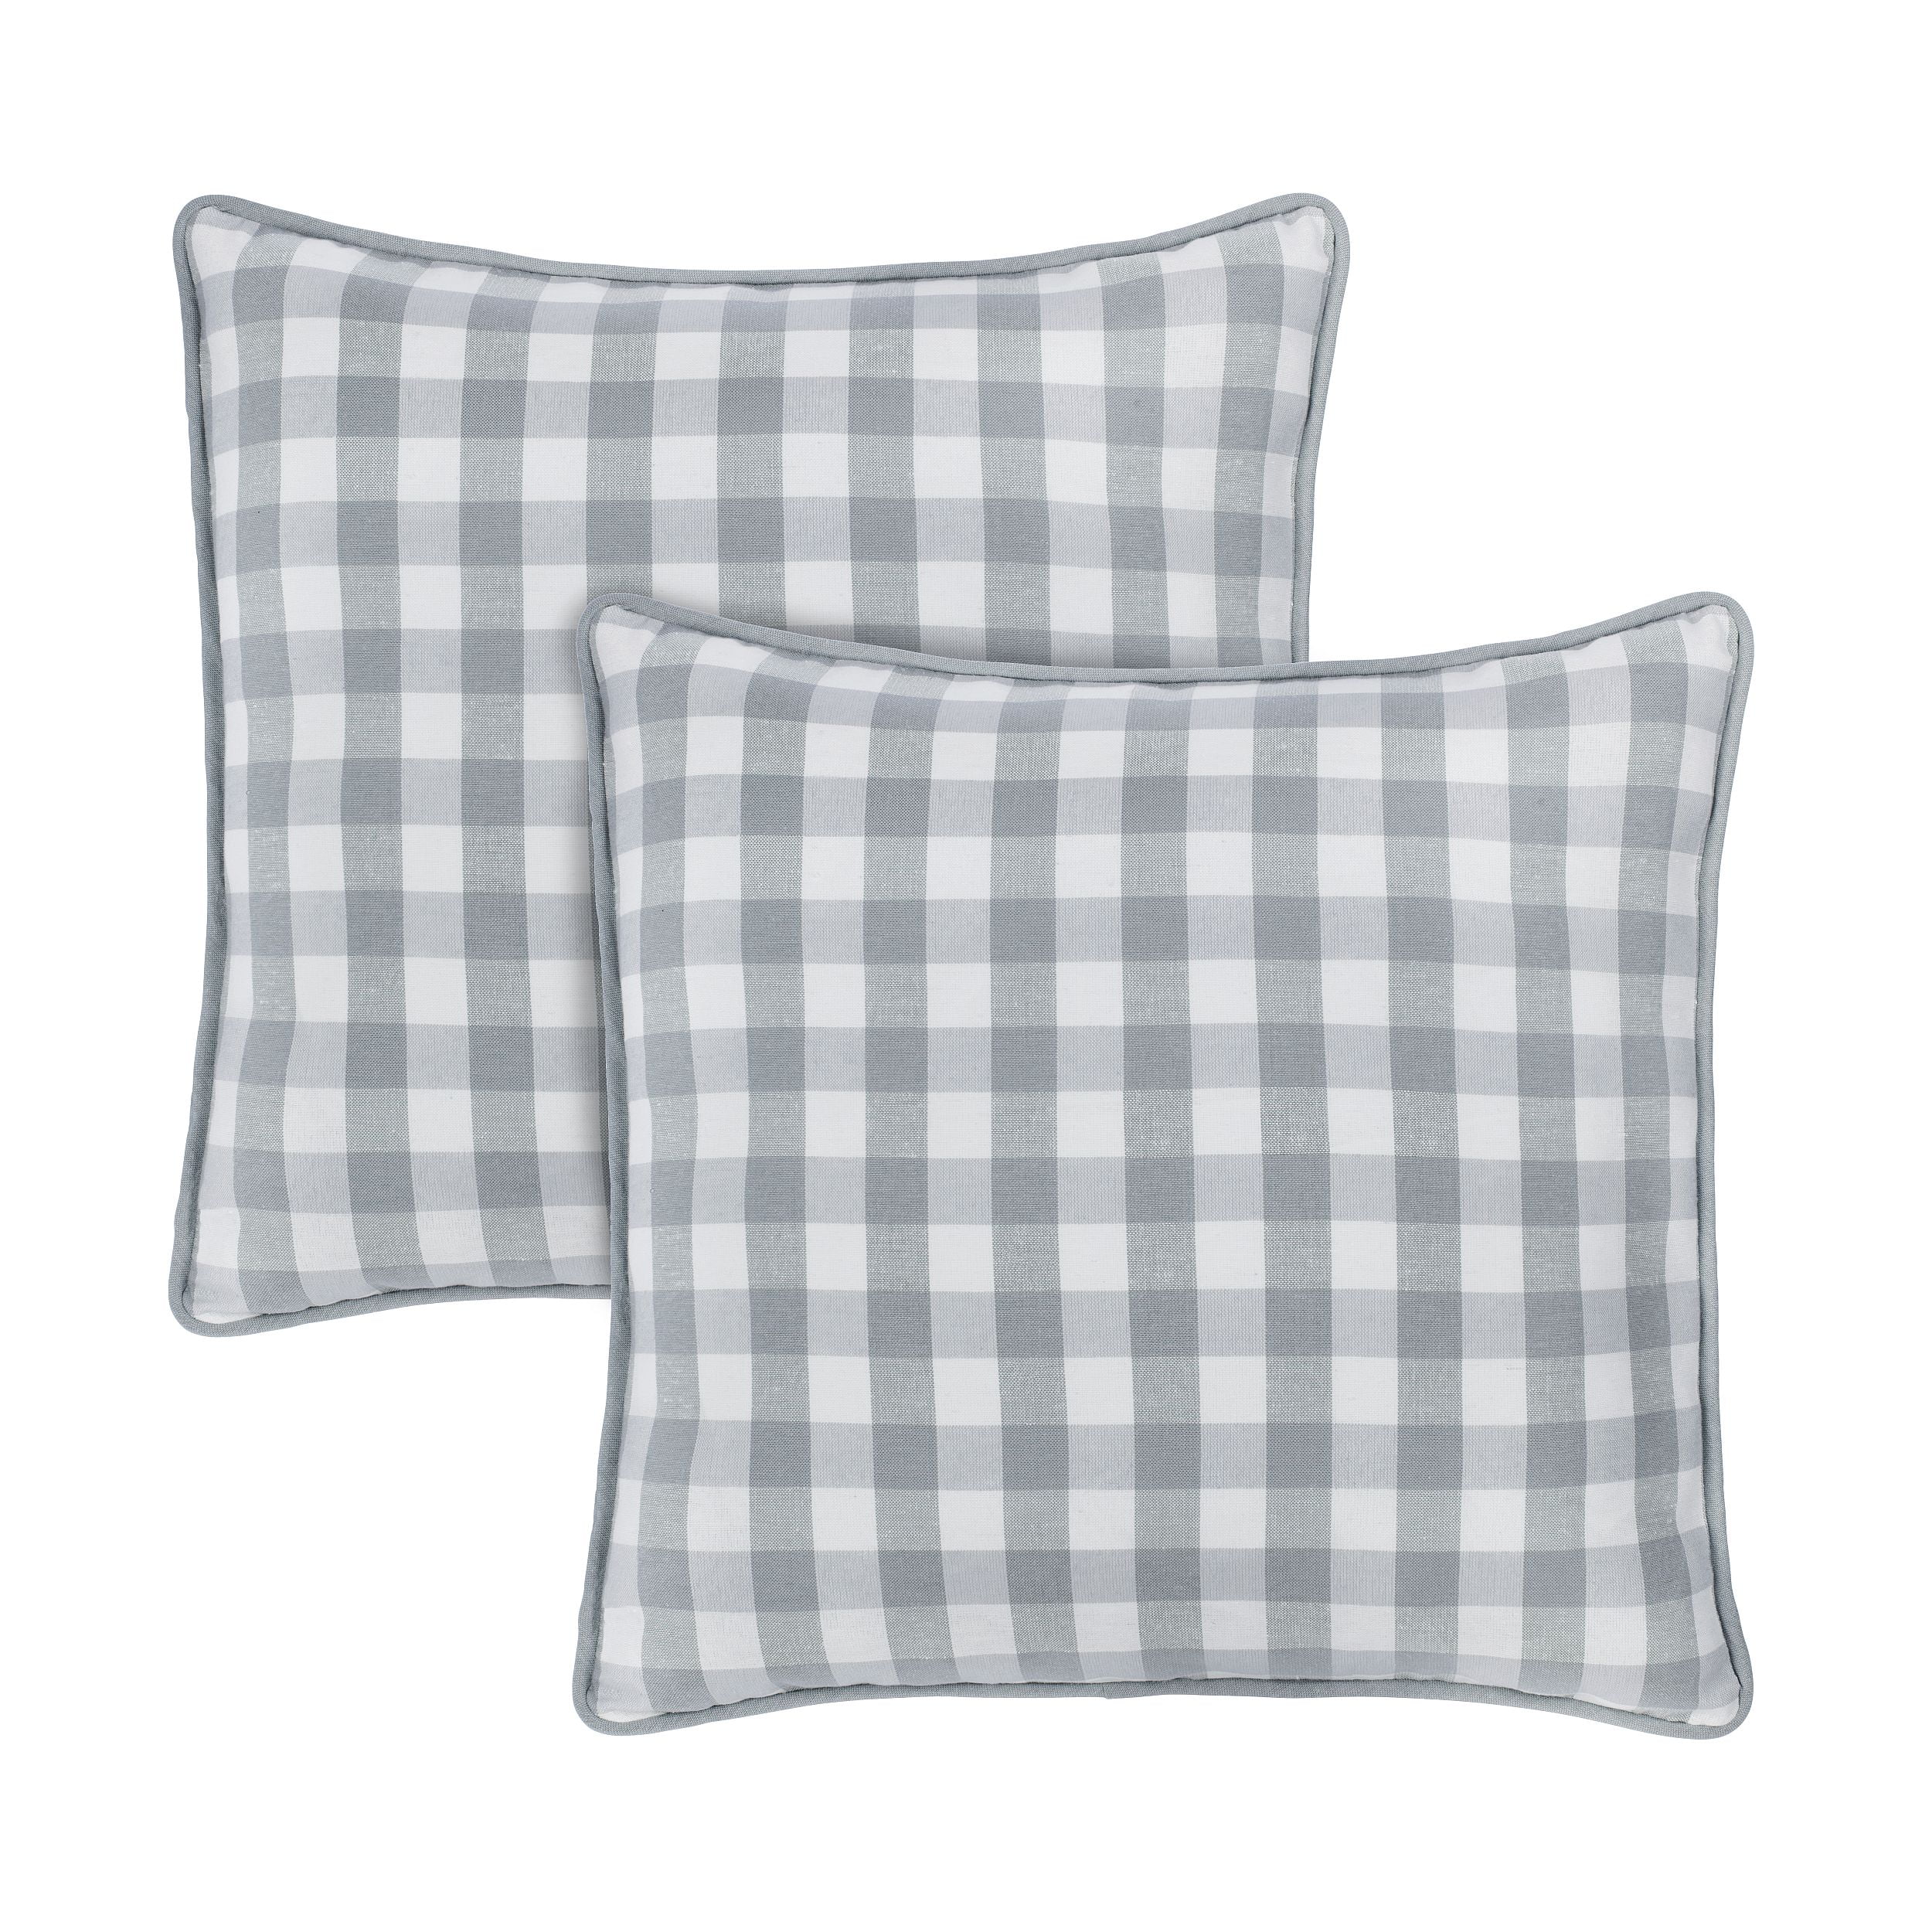 Picture of Achim BCPC18GY72 18 x 18 in. Buffalo Check Pillow Covers, Grey